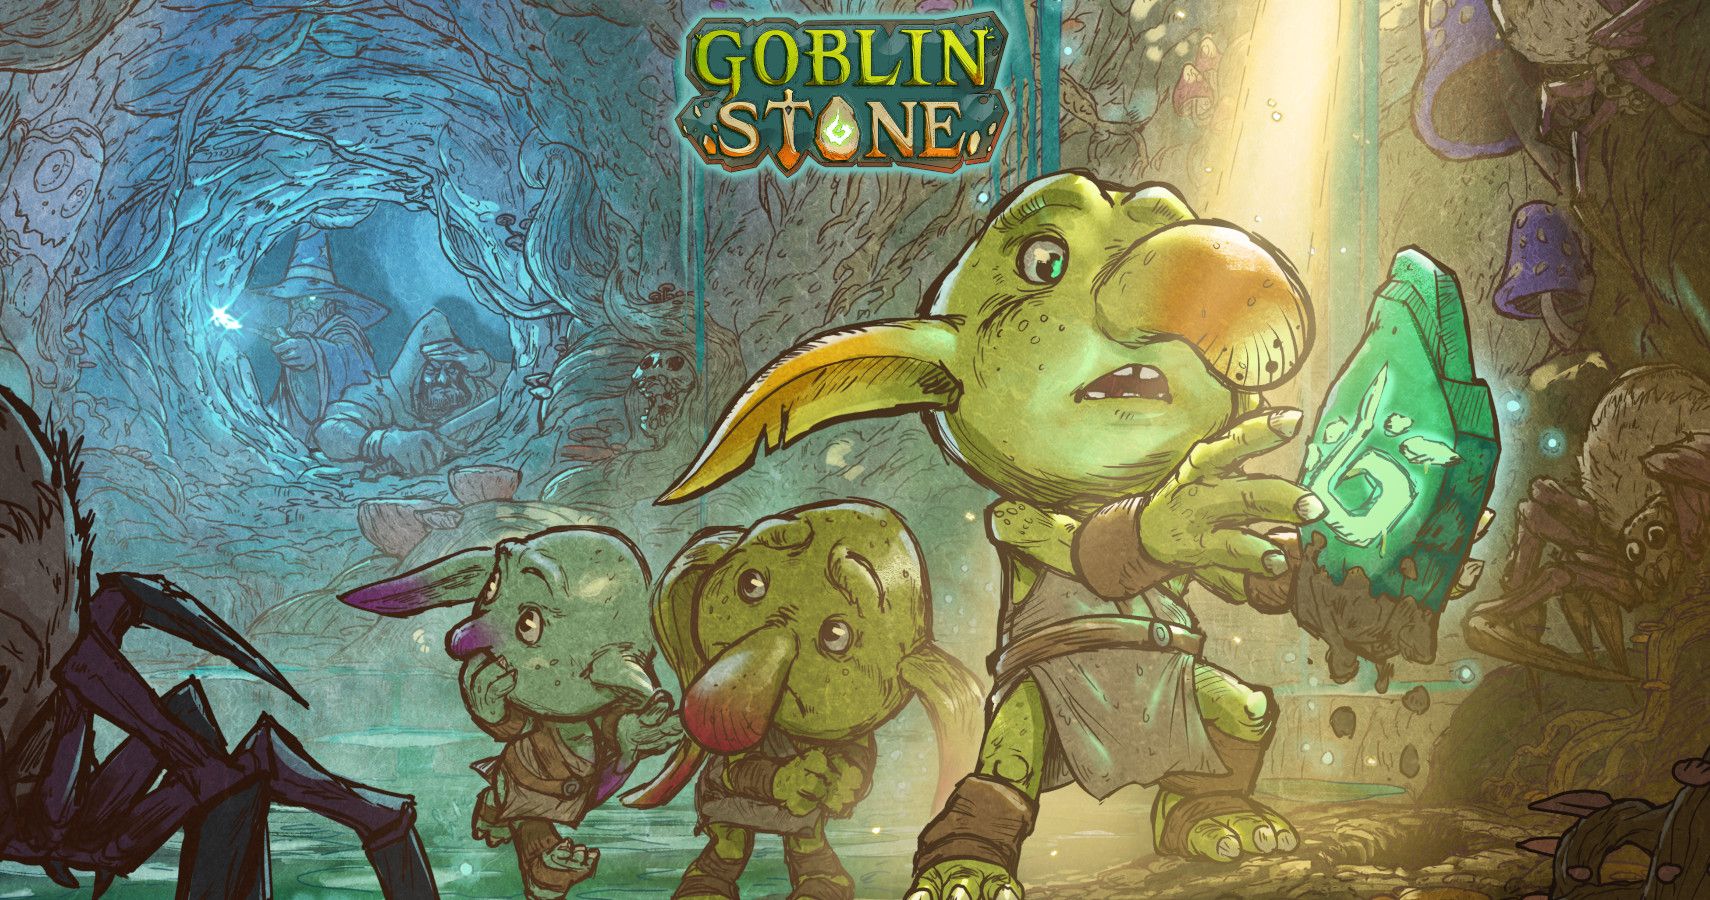 concept art showing some goblins nervously discovering a stone with a glyph on it